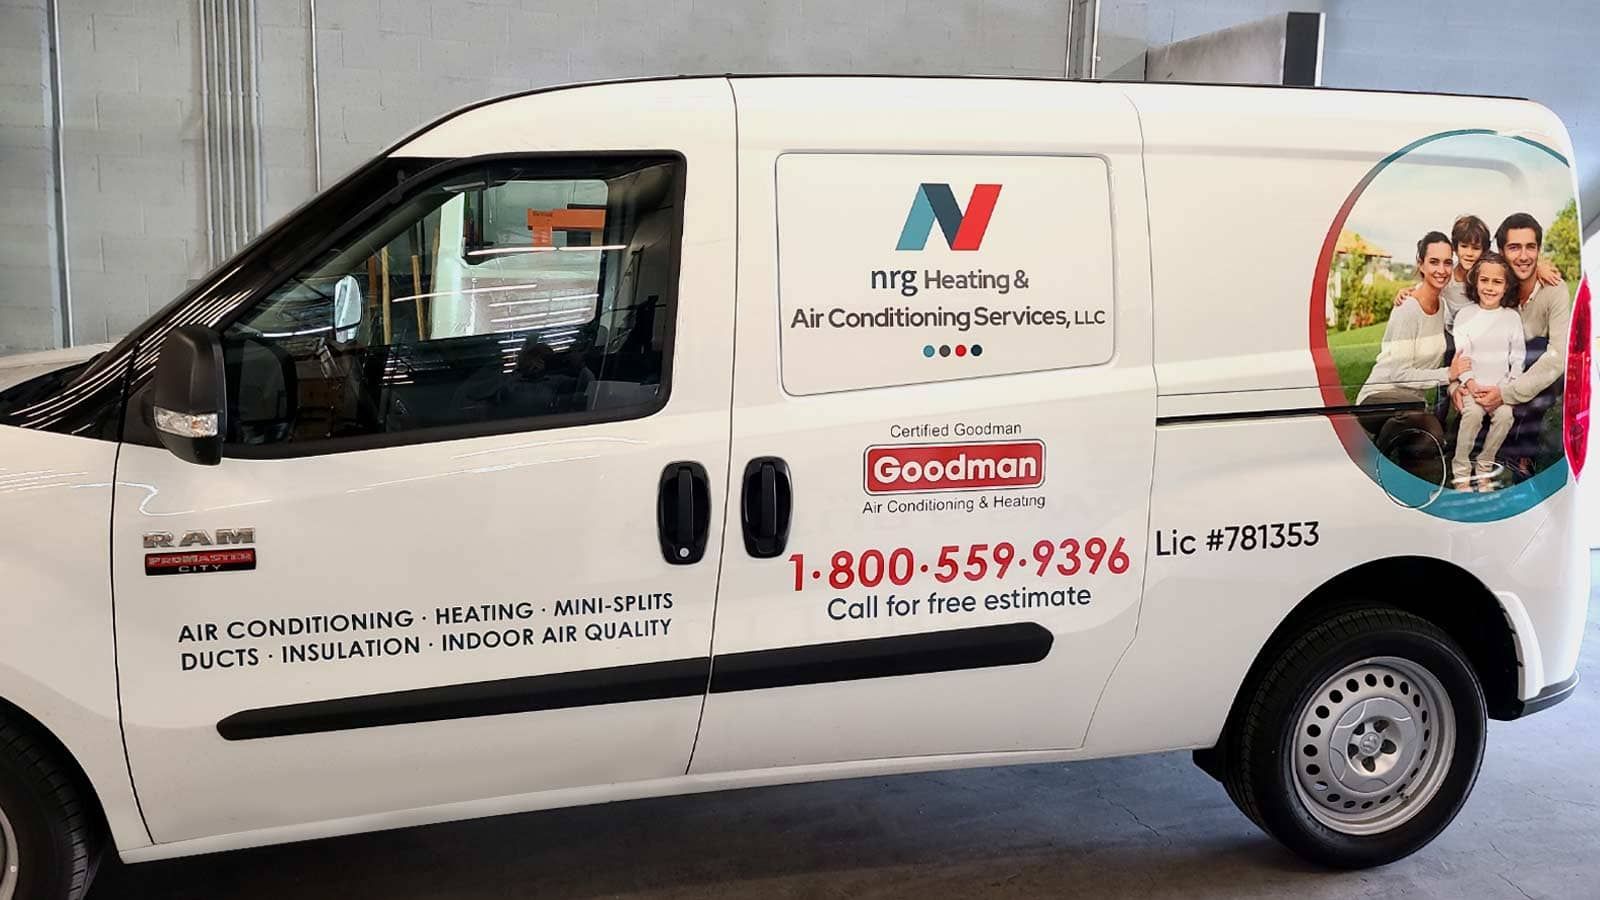 NRG Heating & Air Conditioning Inc. car wraps on doors